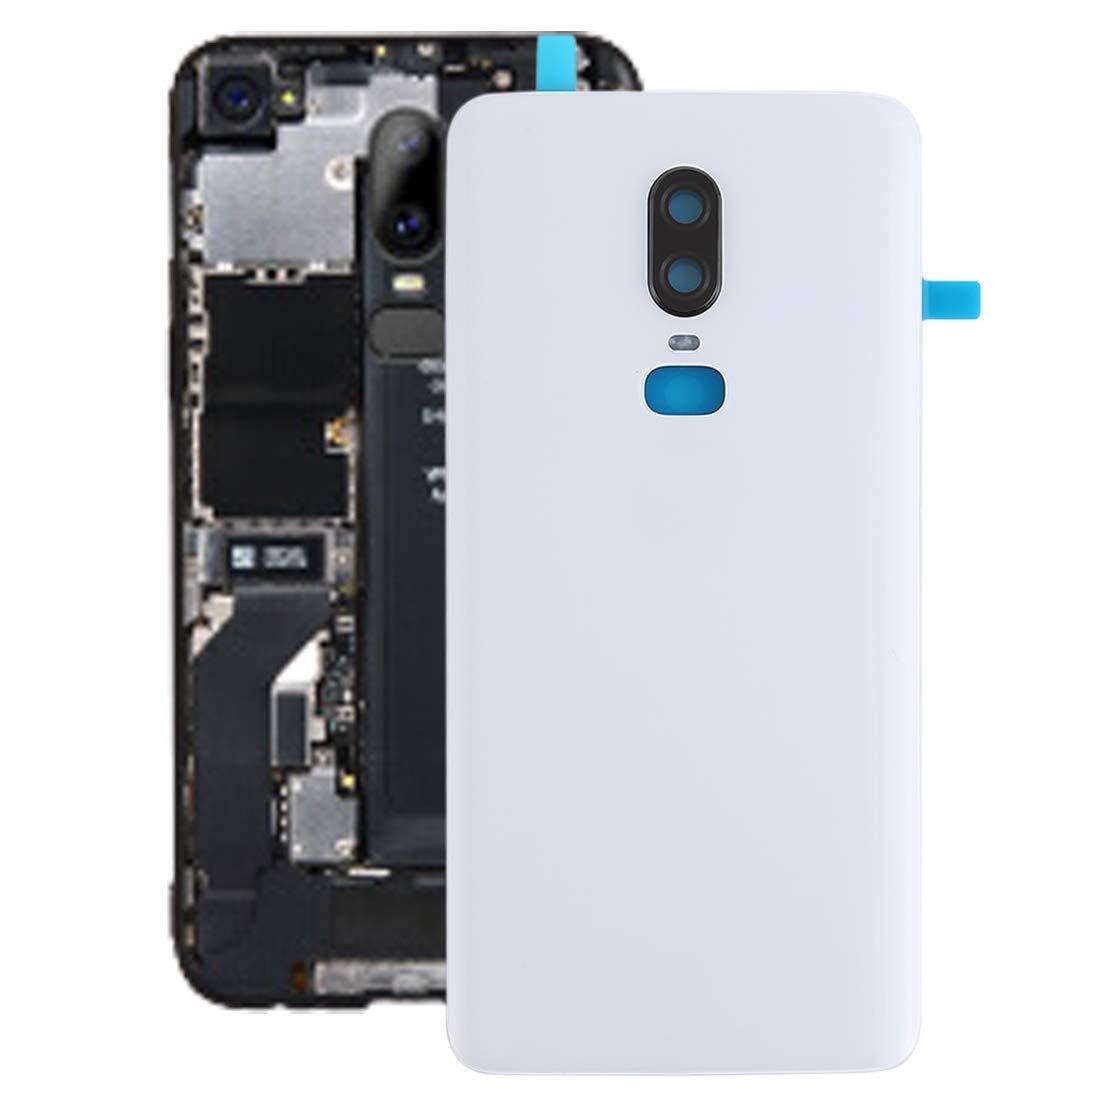 Back Glass for Oneplus 6 White